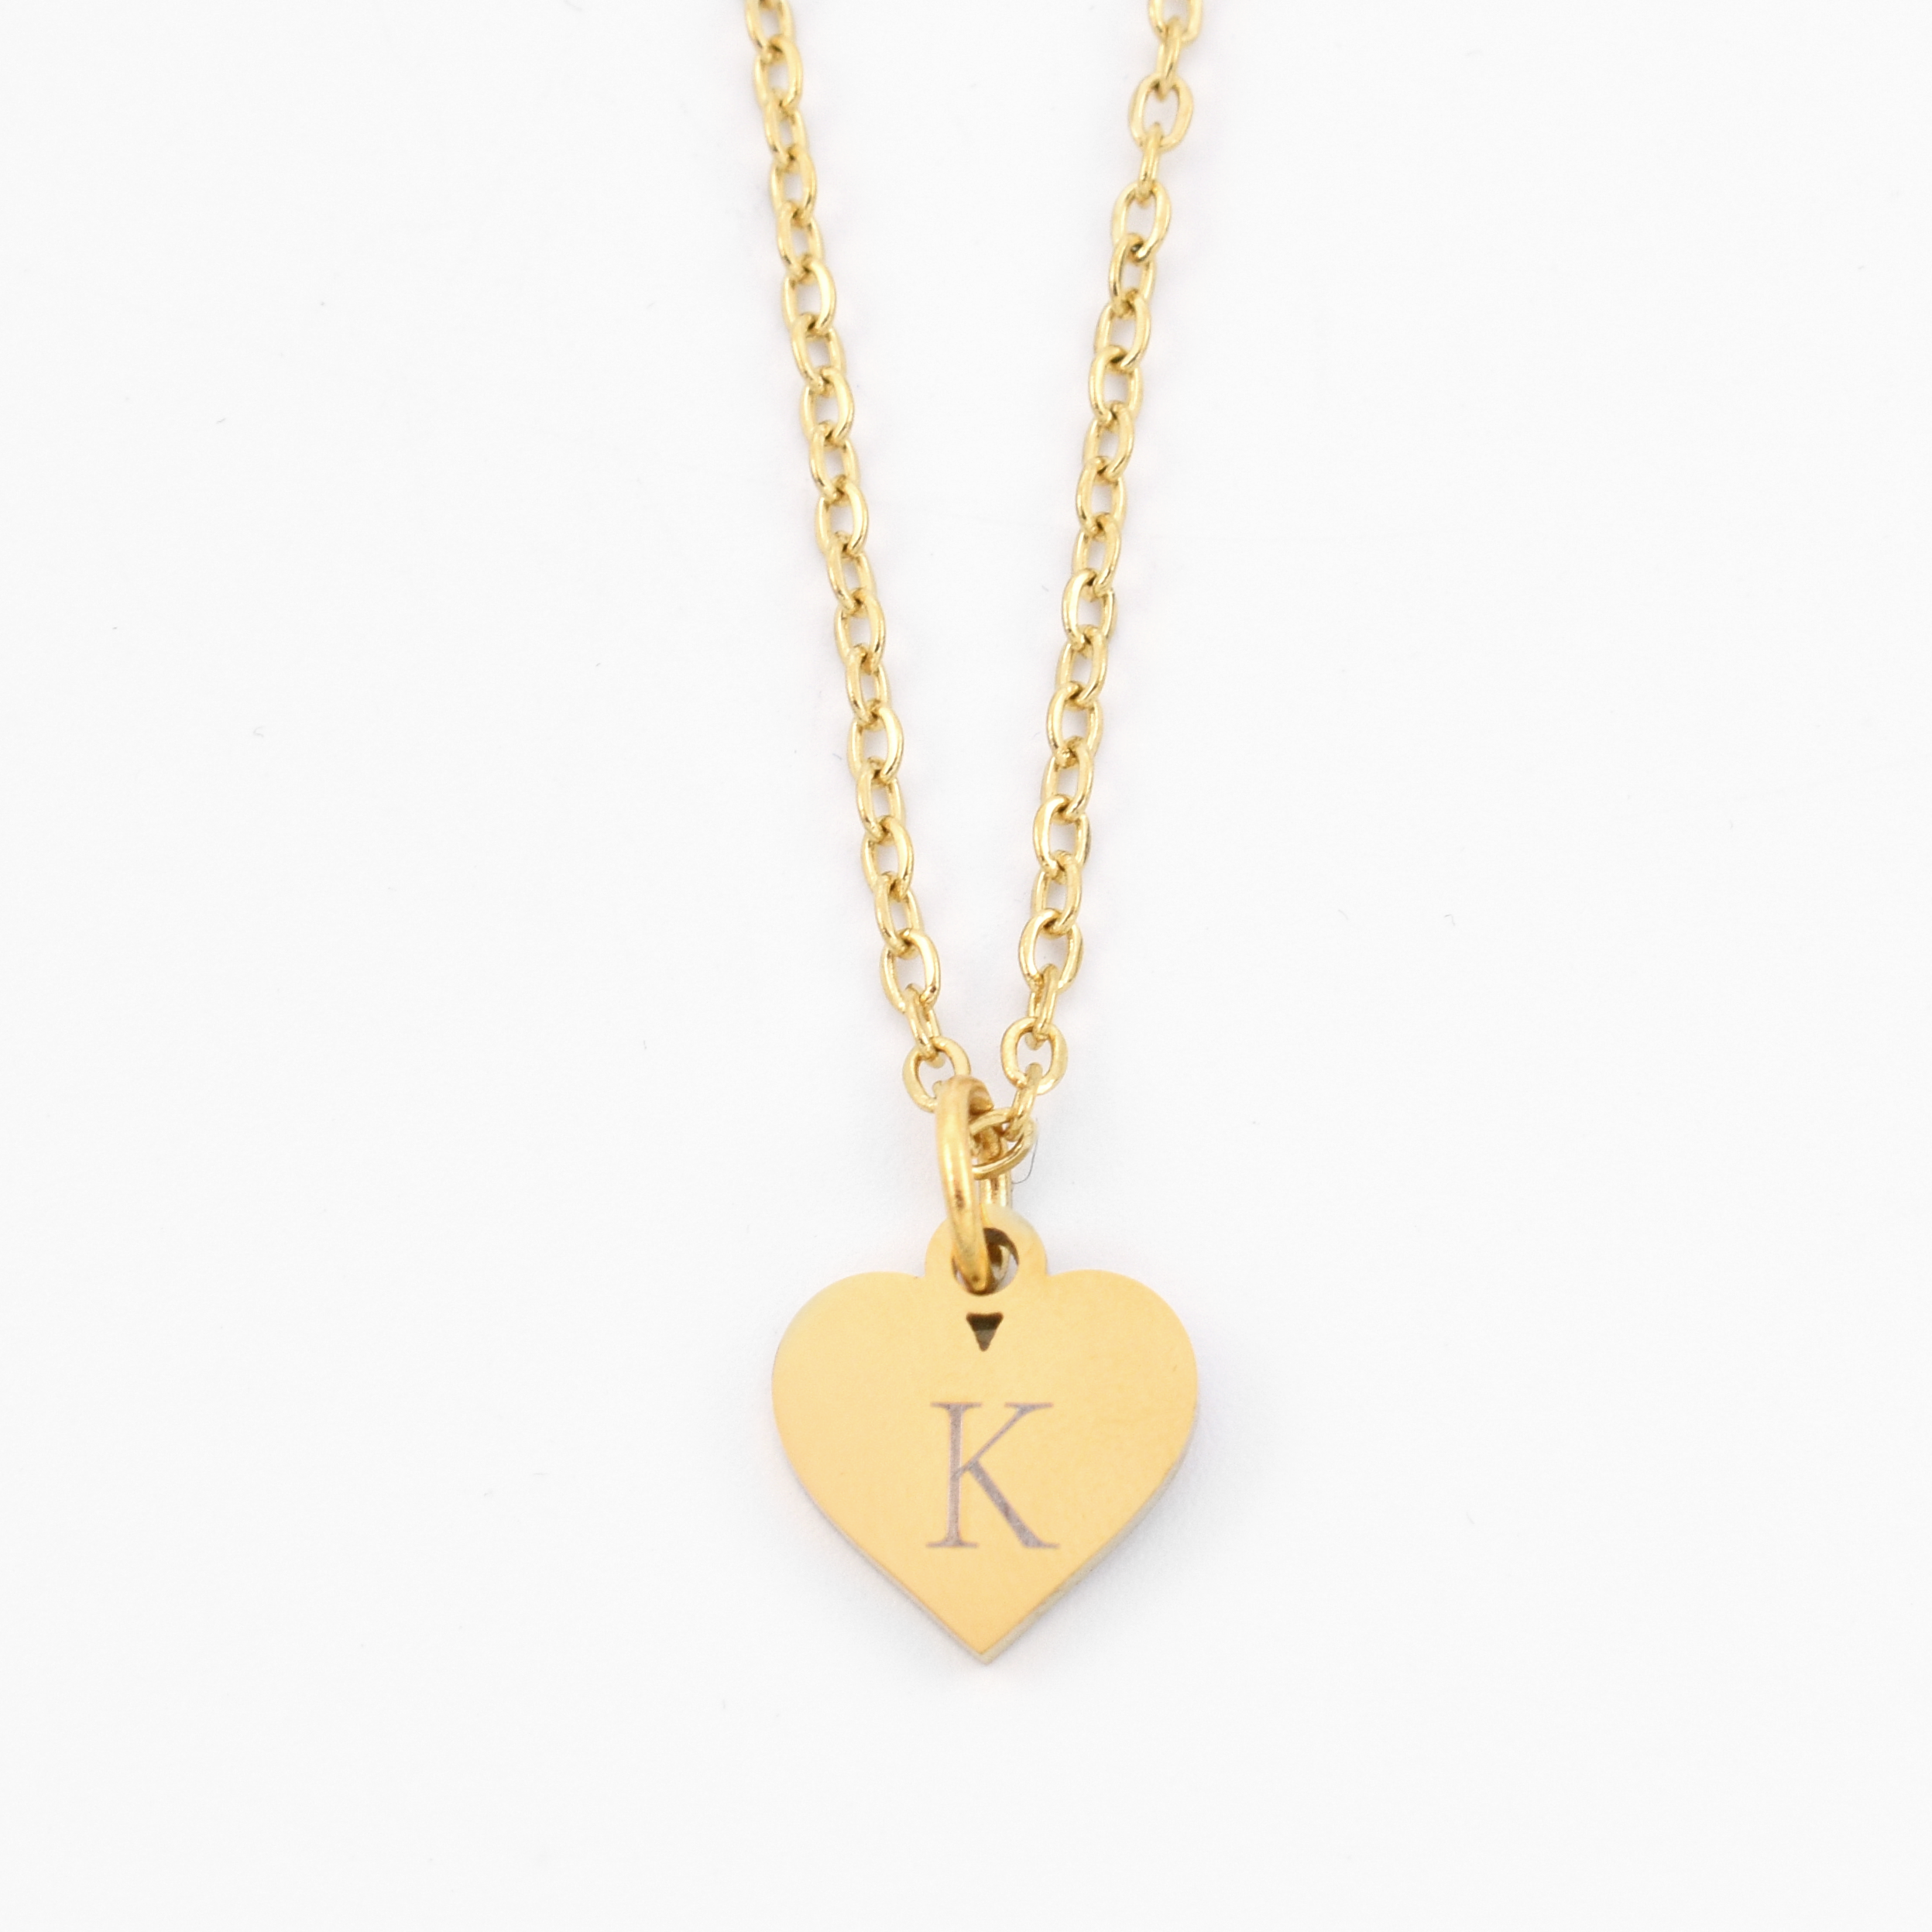 Initials necklace heart